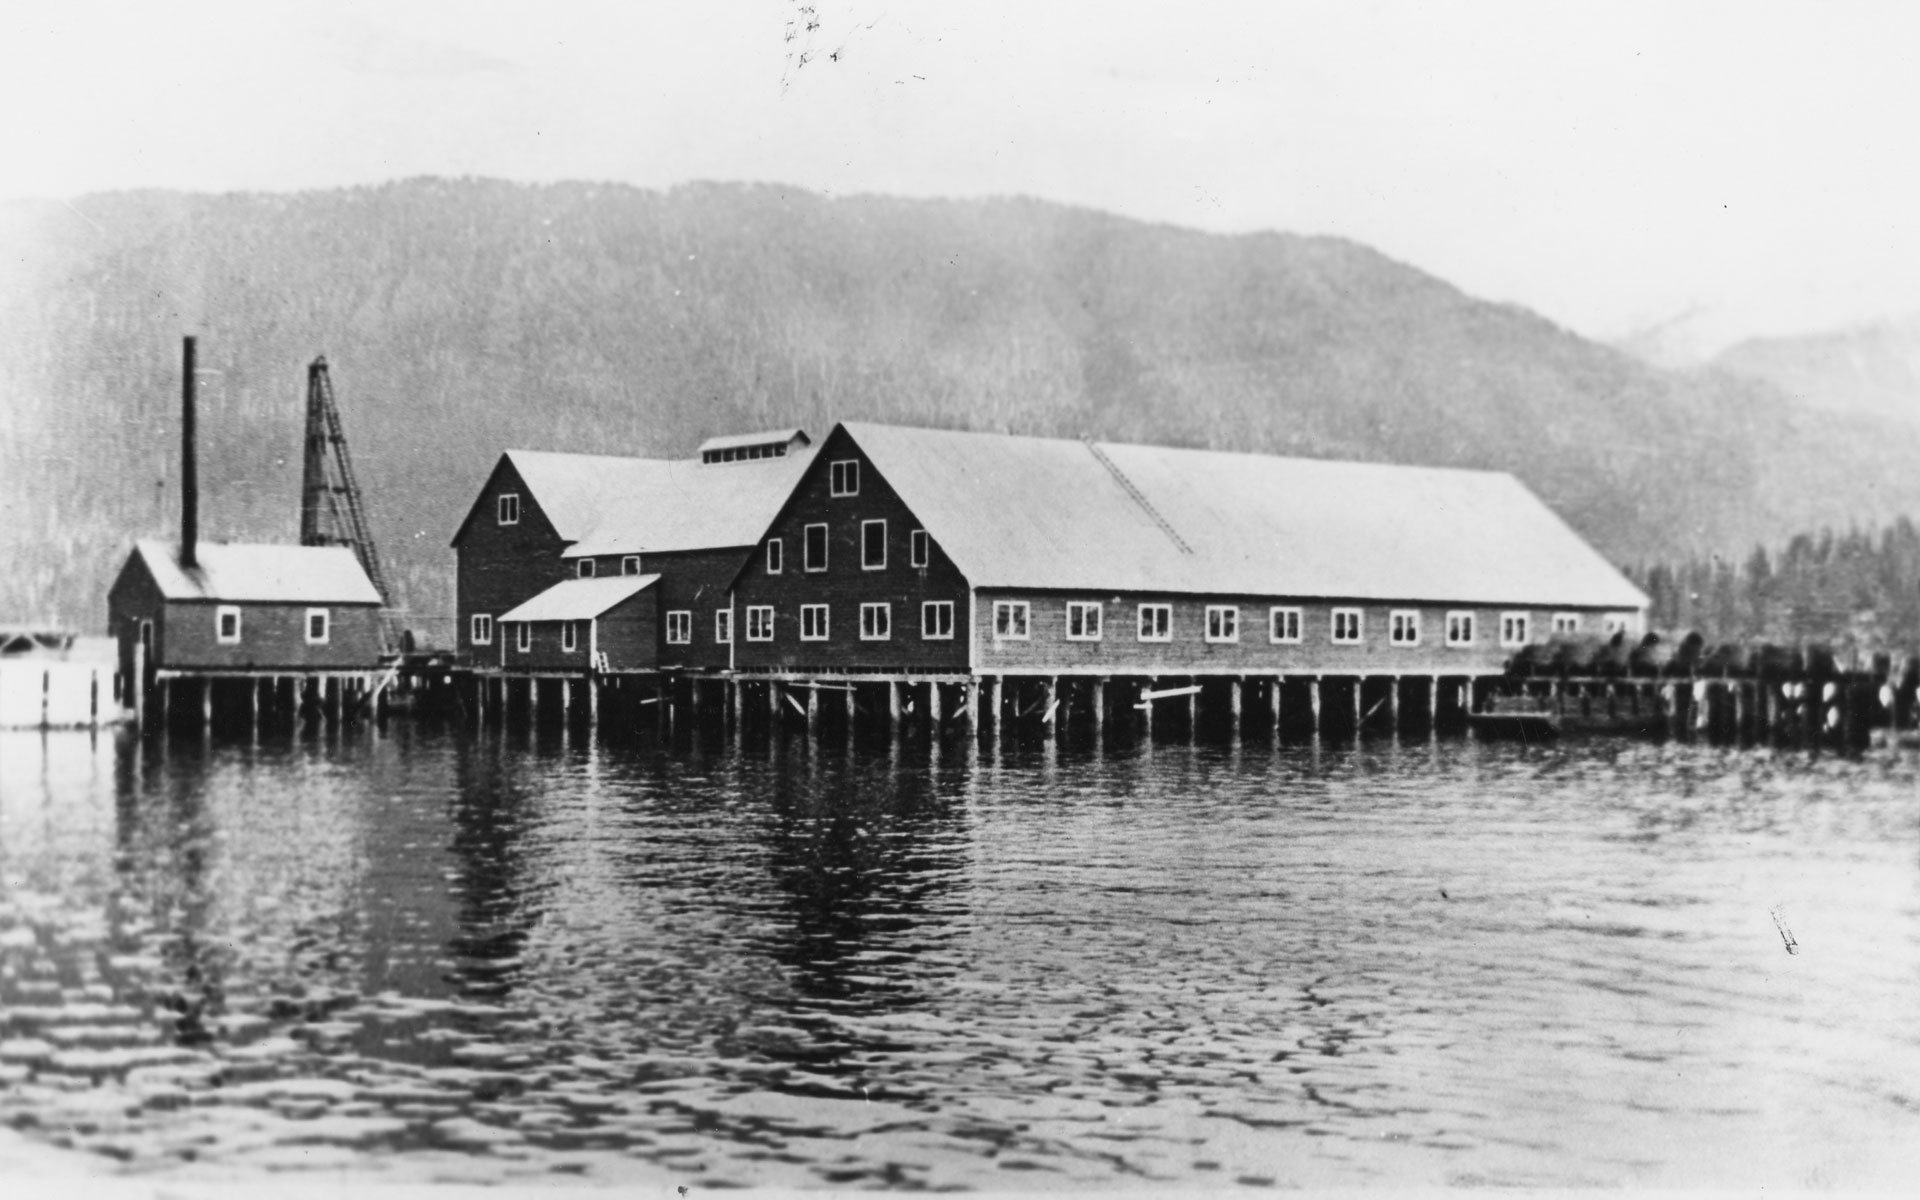 Cannery buildings on pilings over the water.